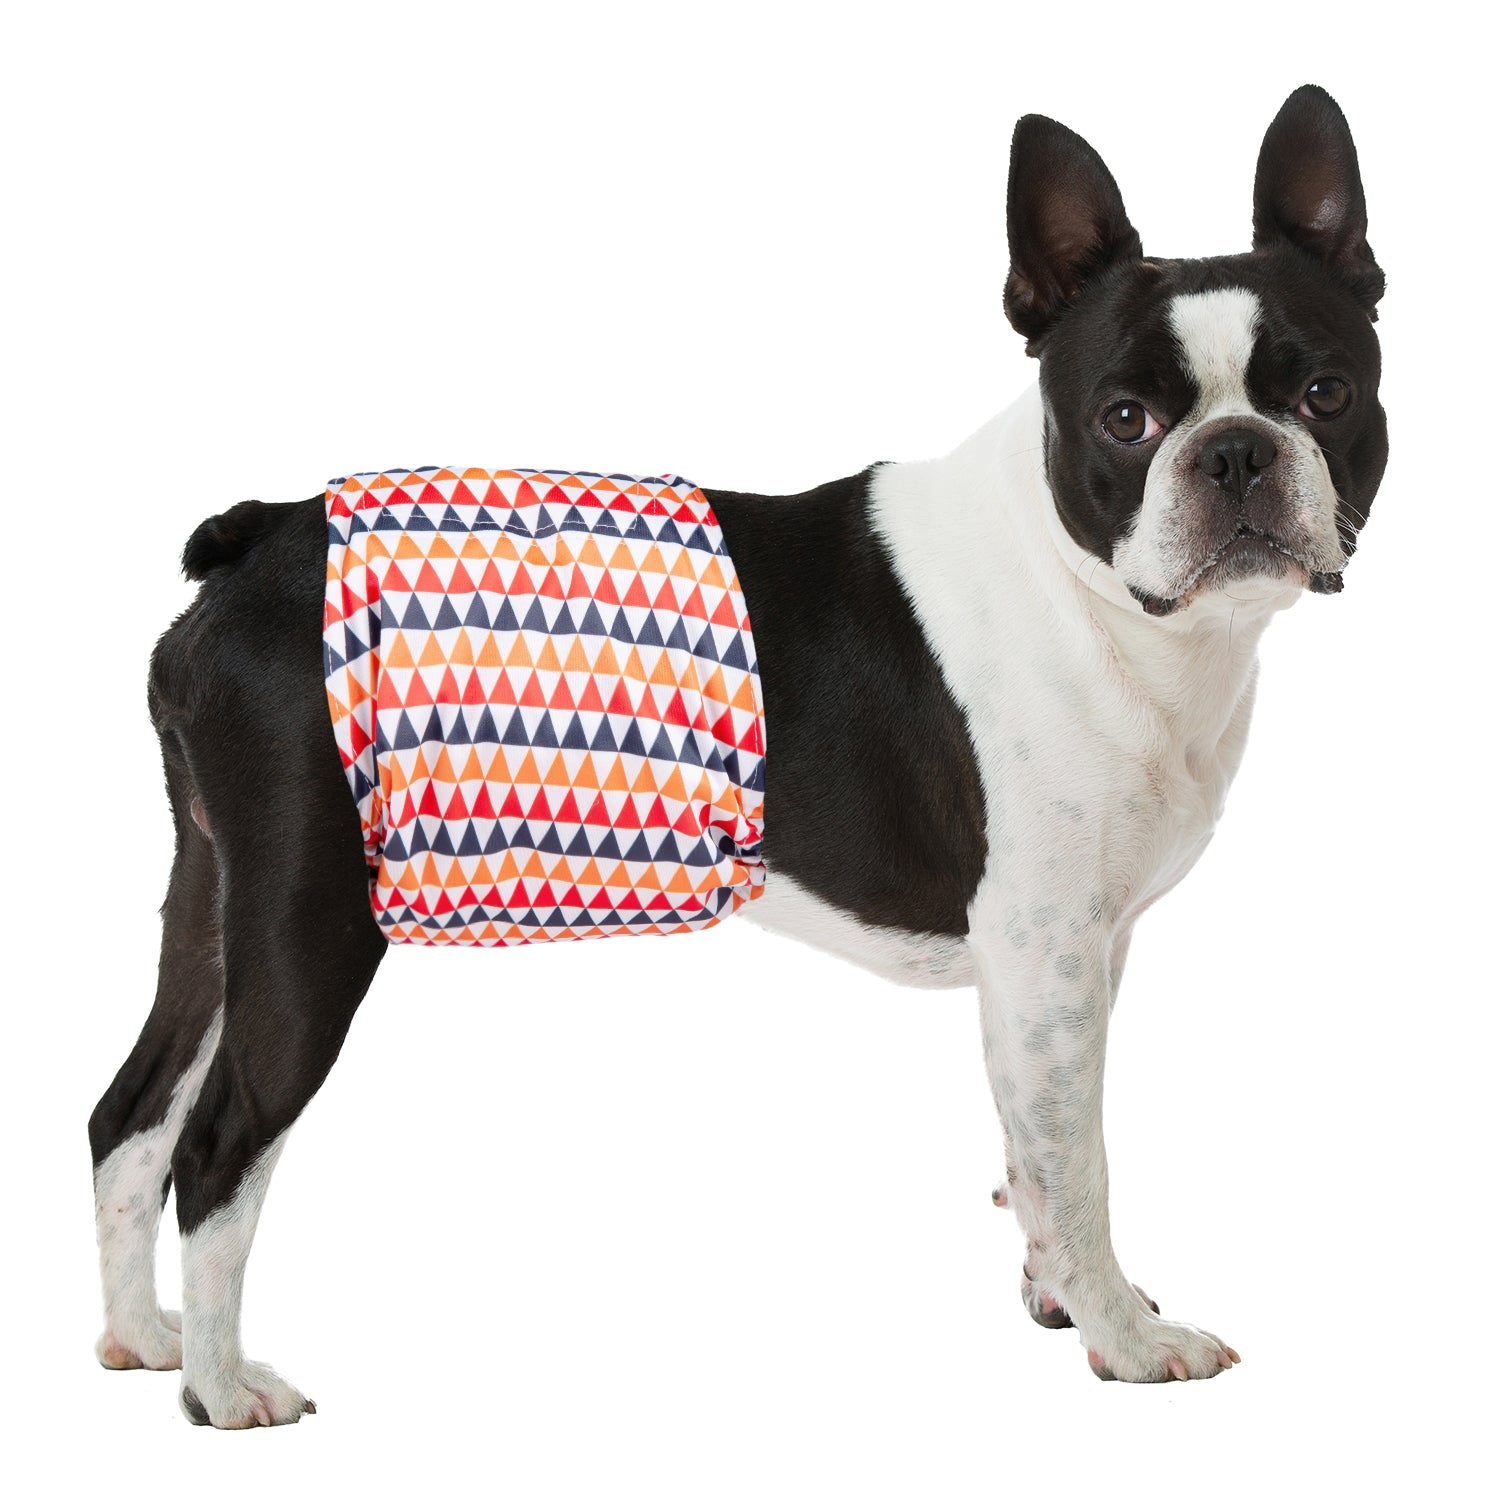 Washable Male Dog Diapers, Reusable Doggy Diapers, 3 Pack (Geometric Patterns)